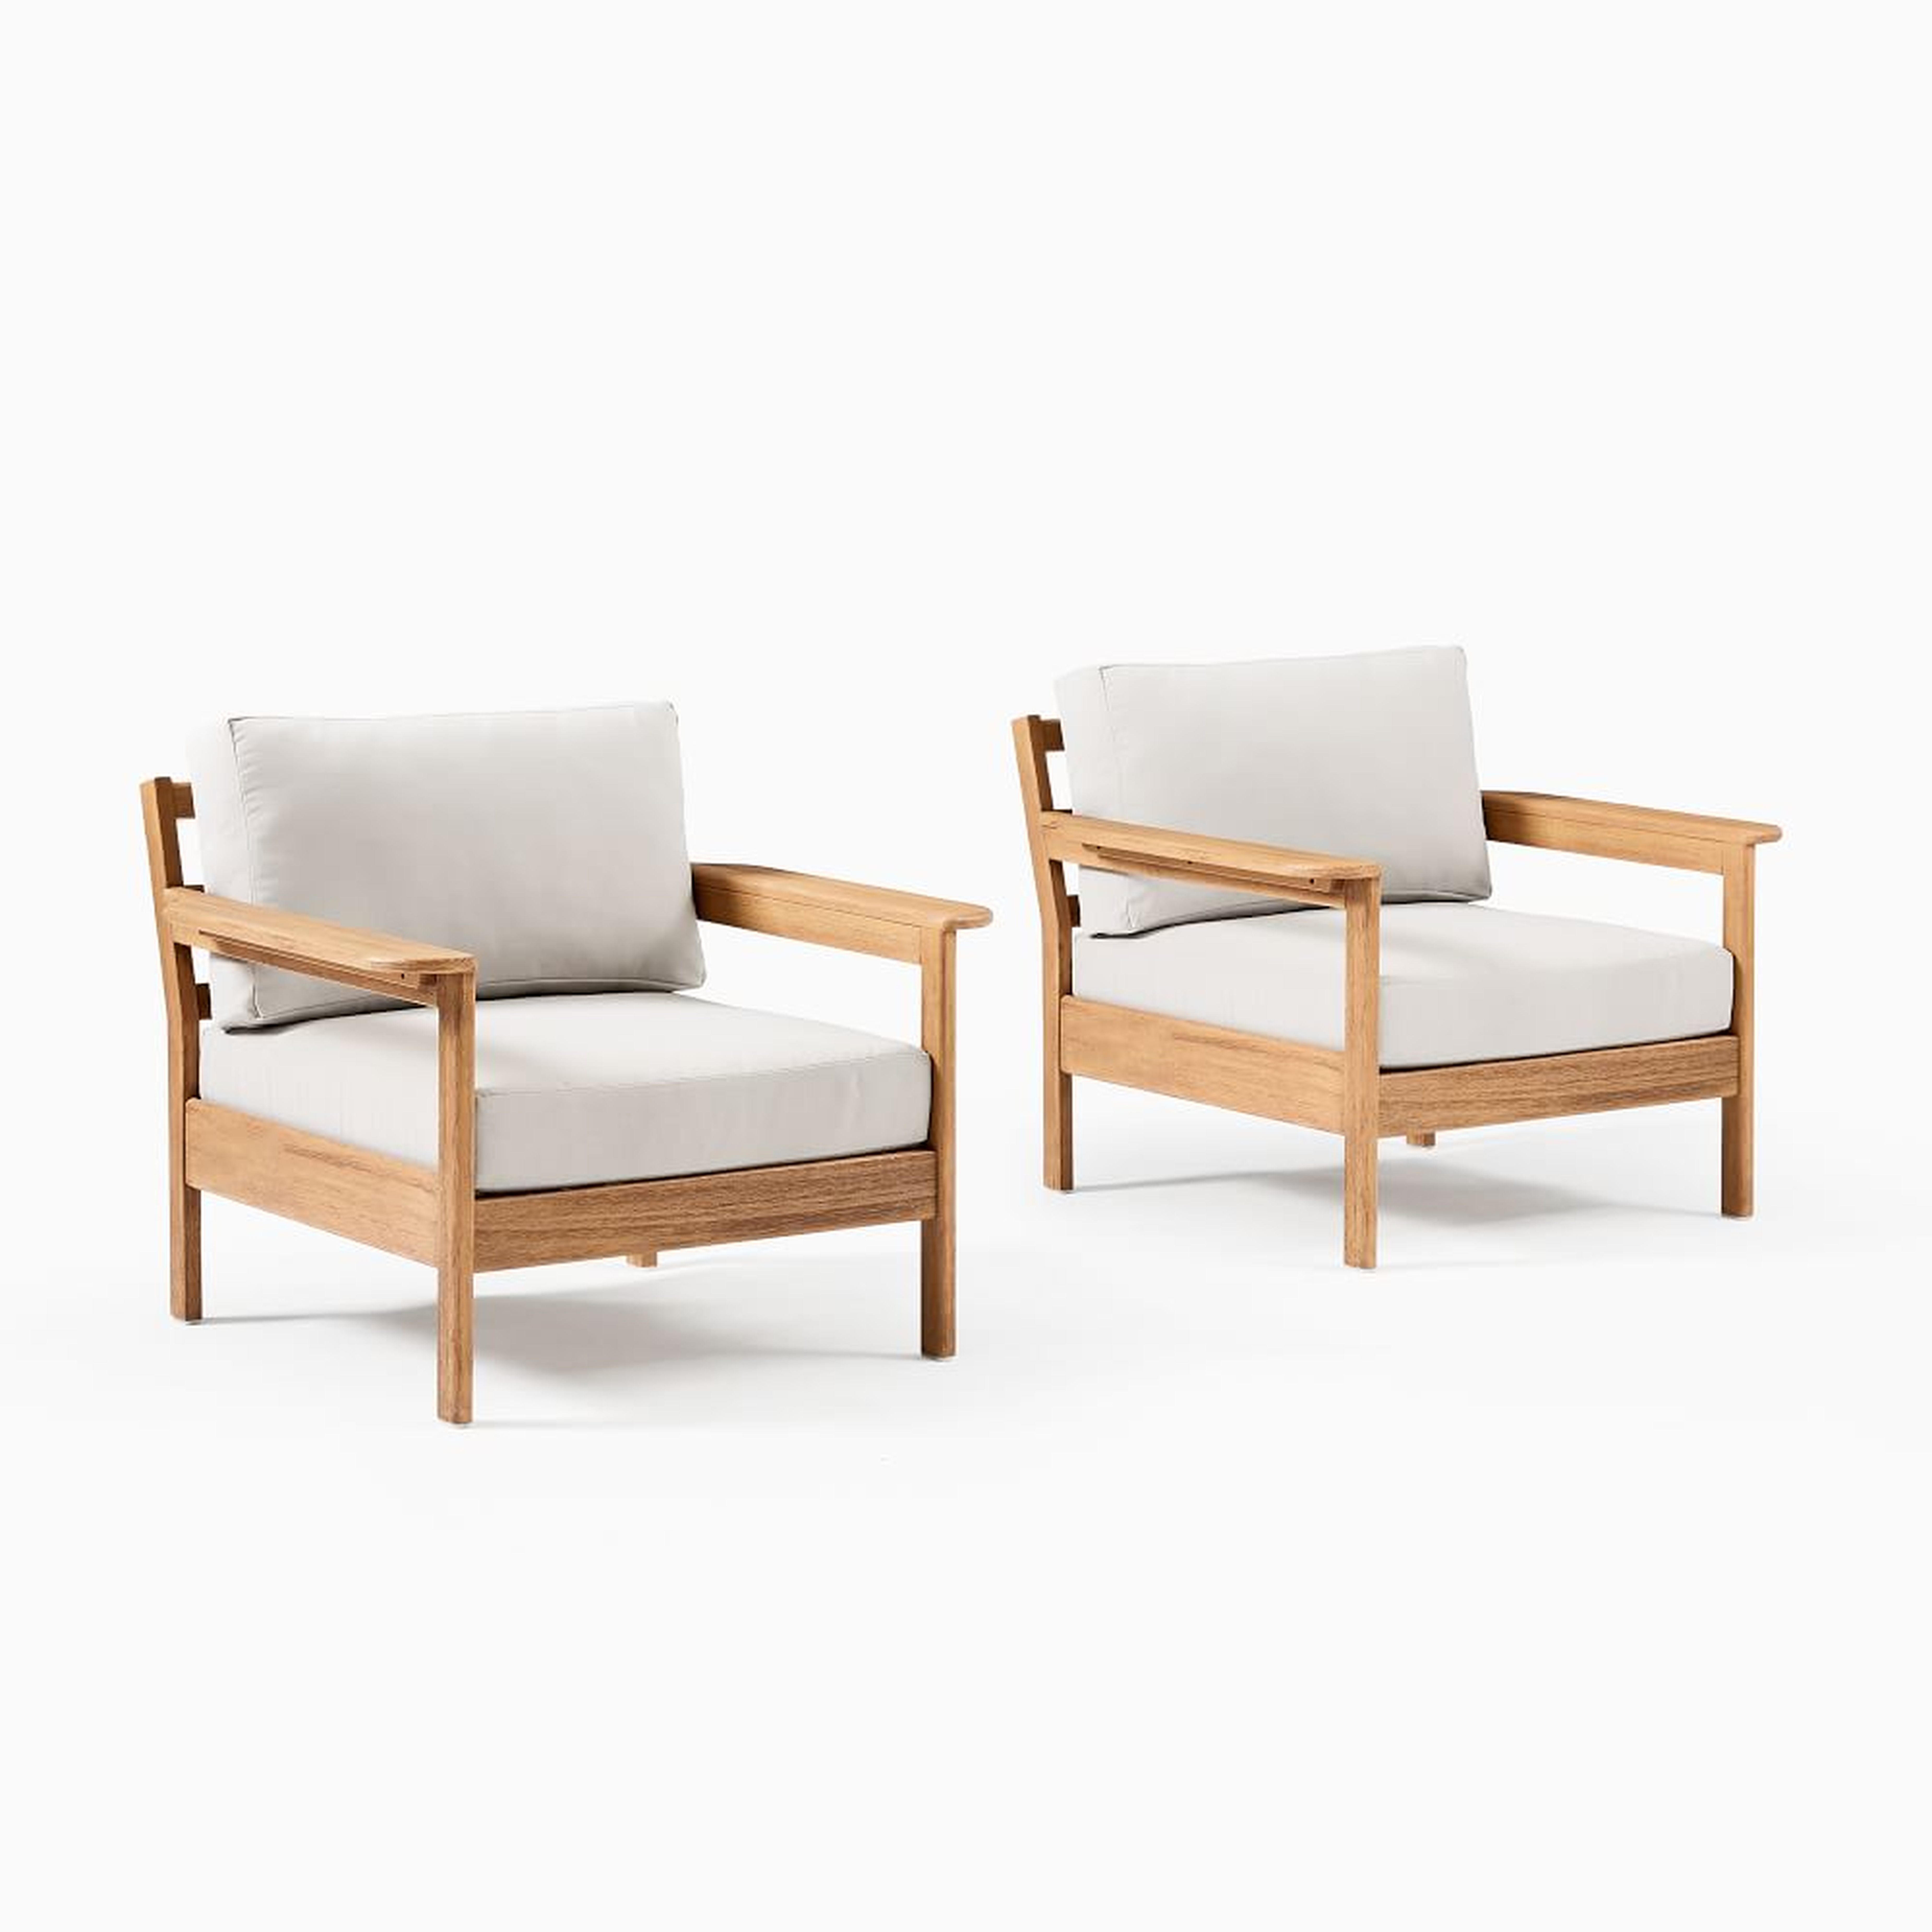 Playa Outdoor Lounge Chairs, Mast, Set of 2 - West Elm